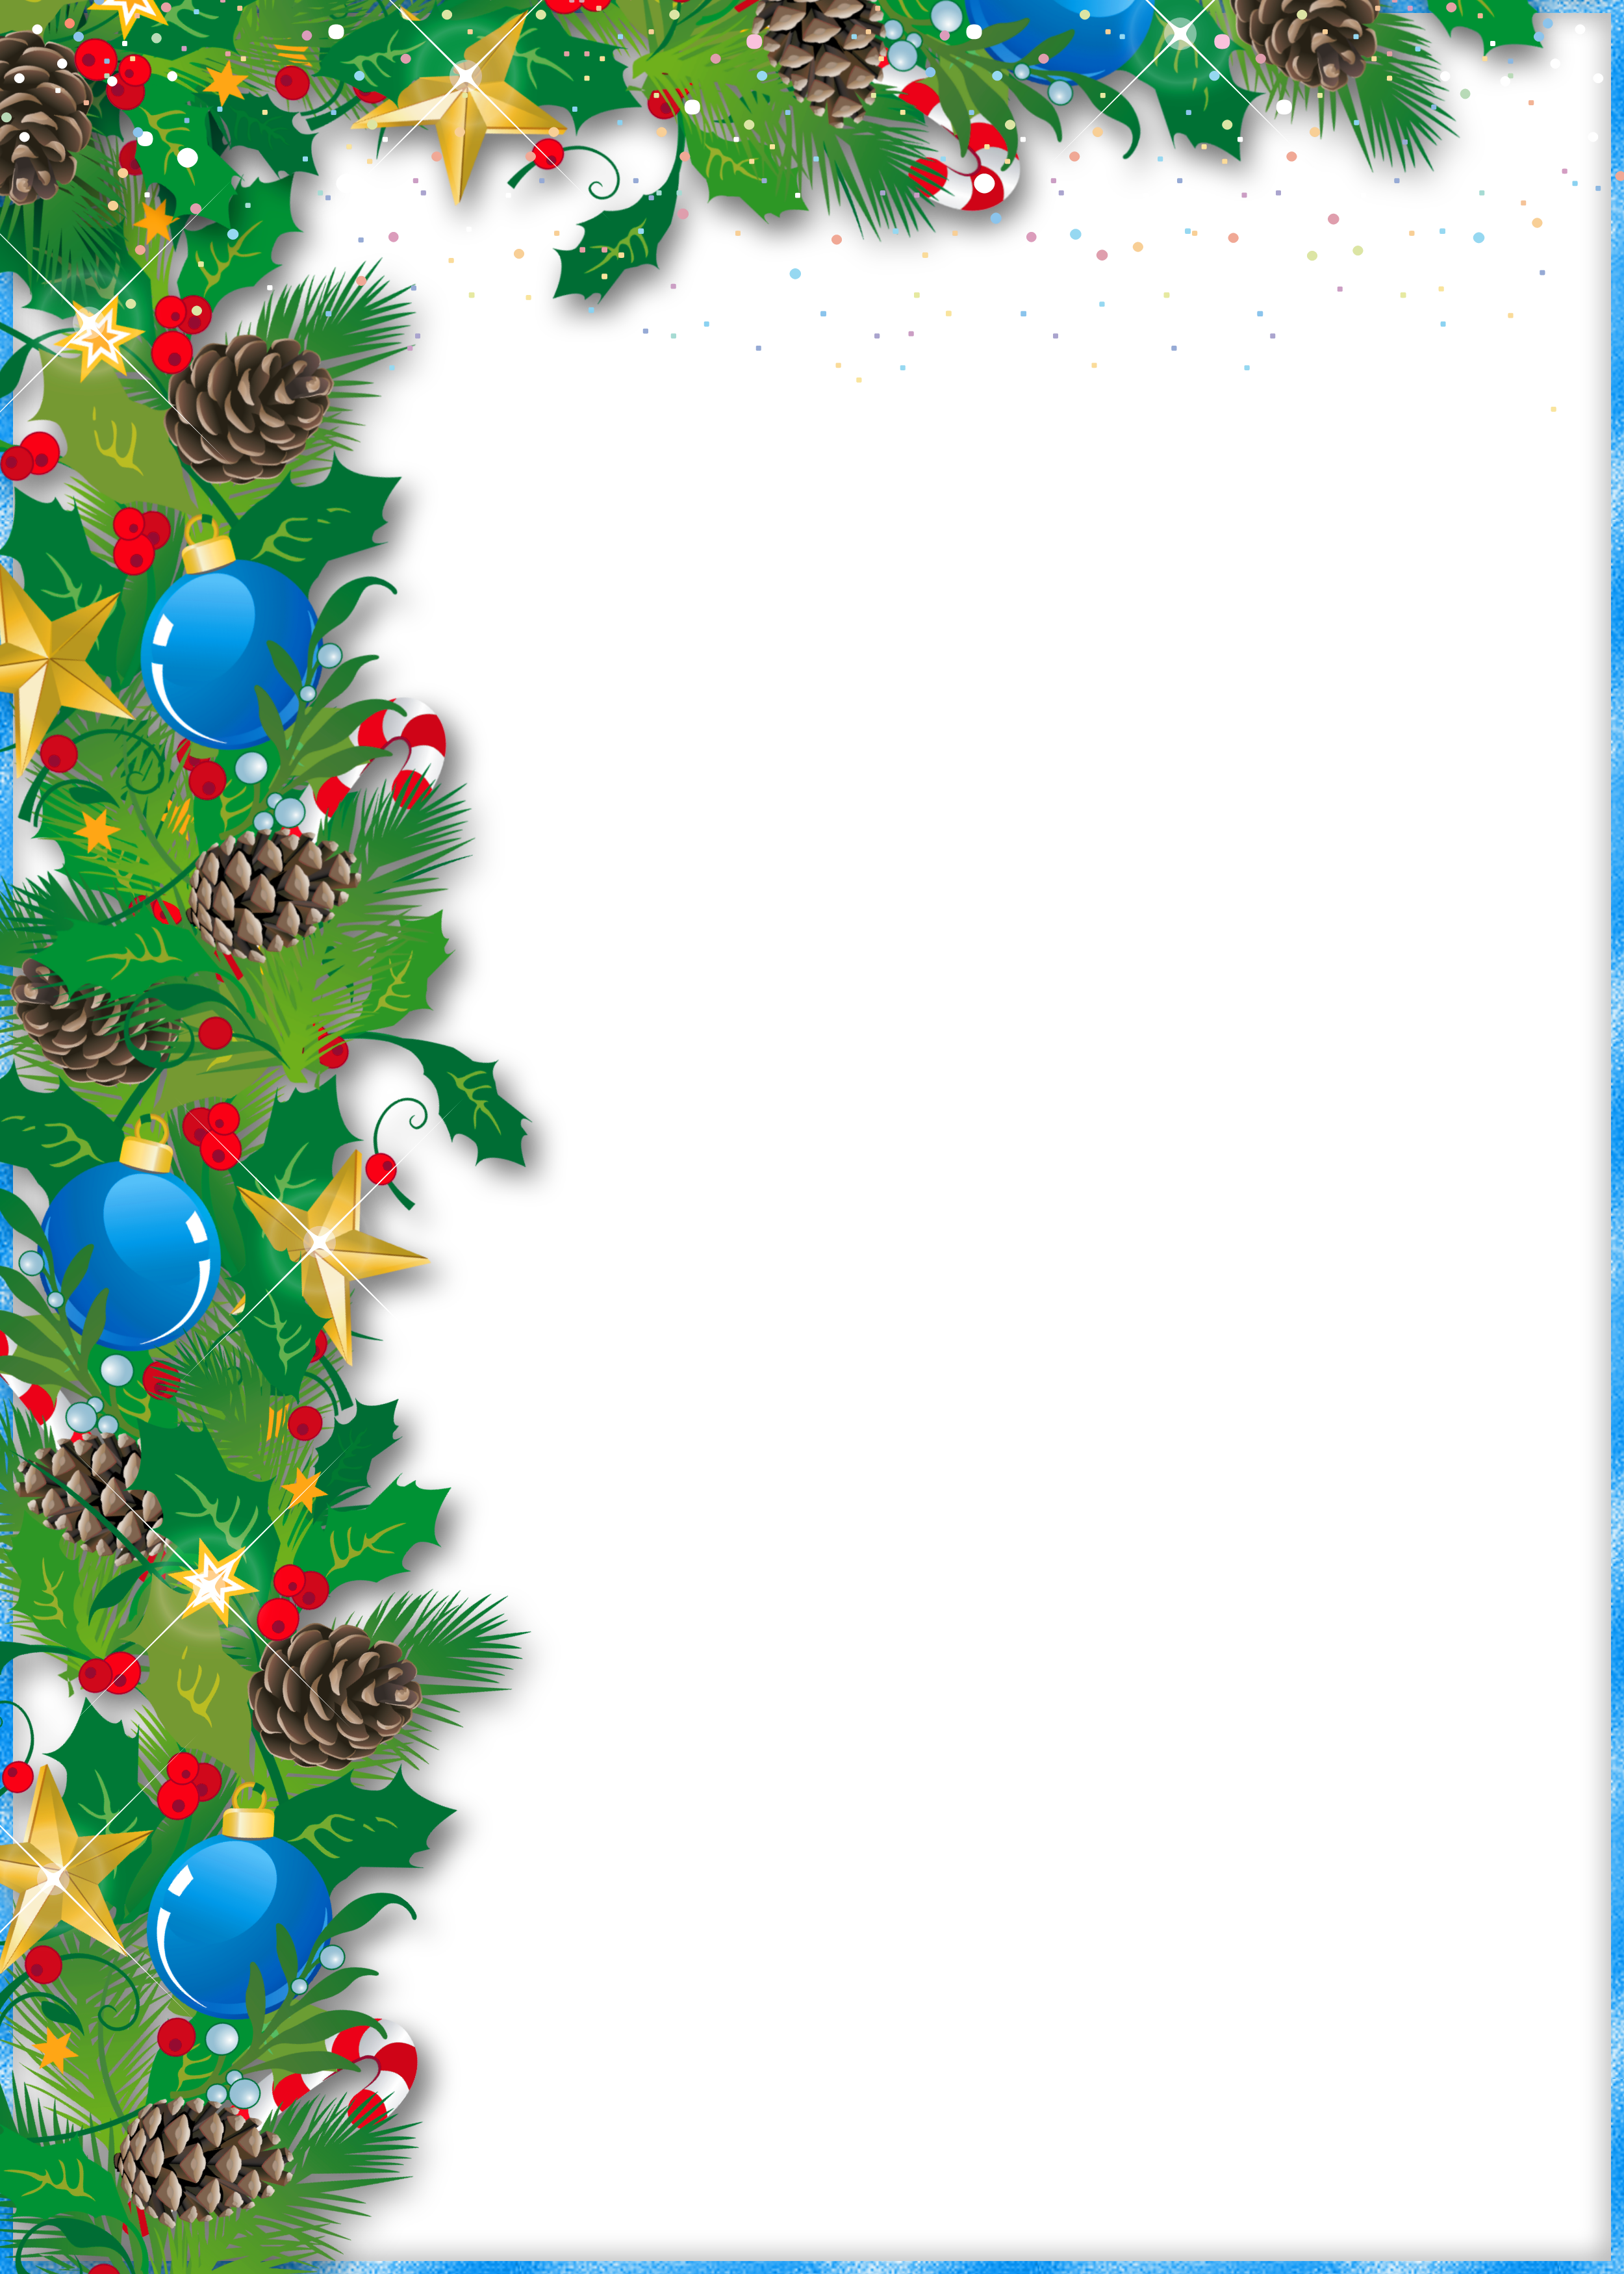 Download PNG image - Christmas Ornaments Frame PNG HD 